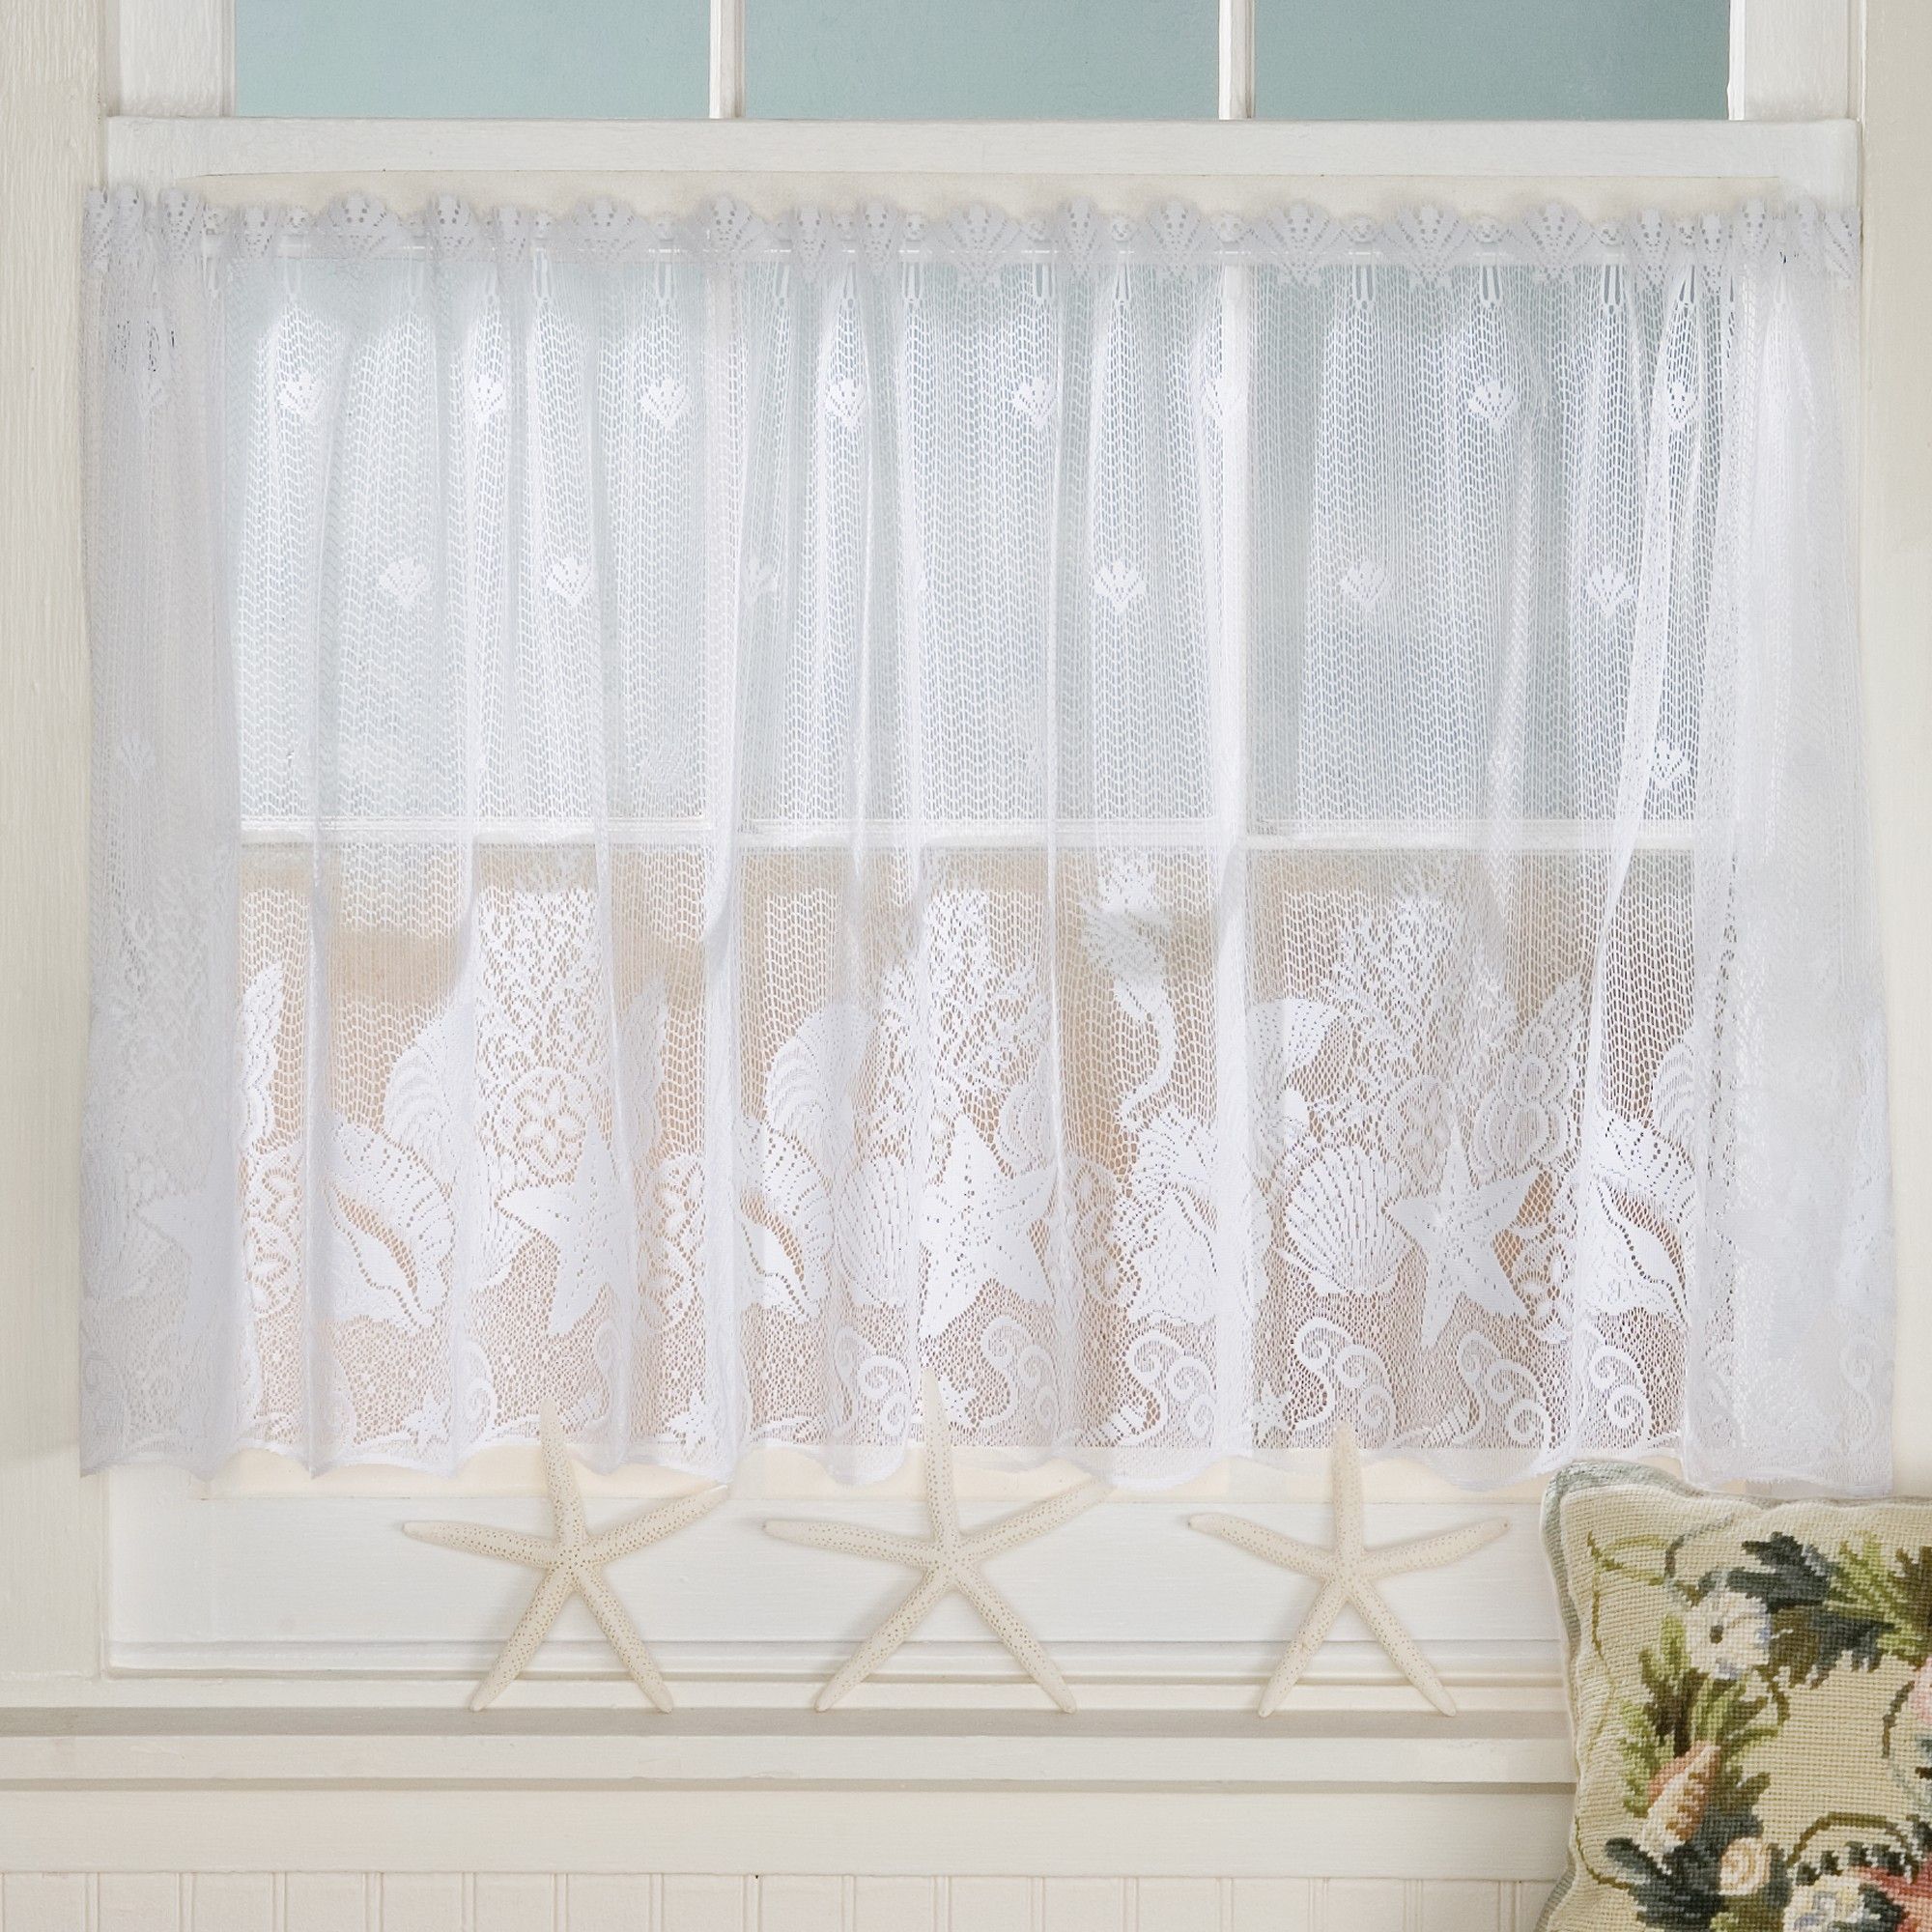 Seashell Lace Curtains | Sturbridge Yankee Workshop For Vintage Sea Shore All Over Printed Window Curtains (View 14 of 20)